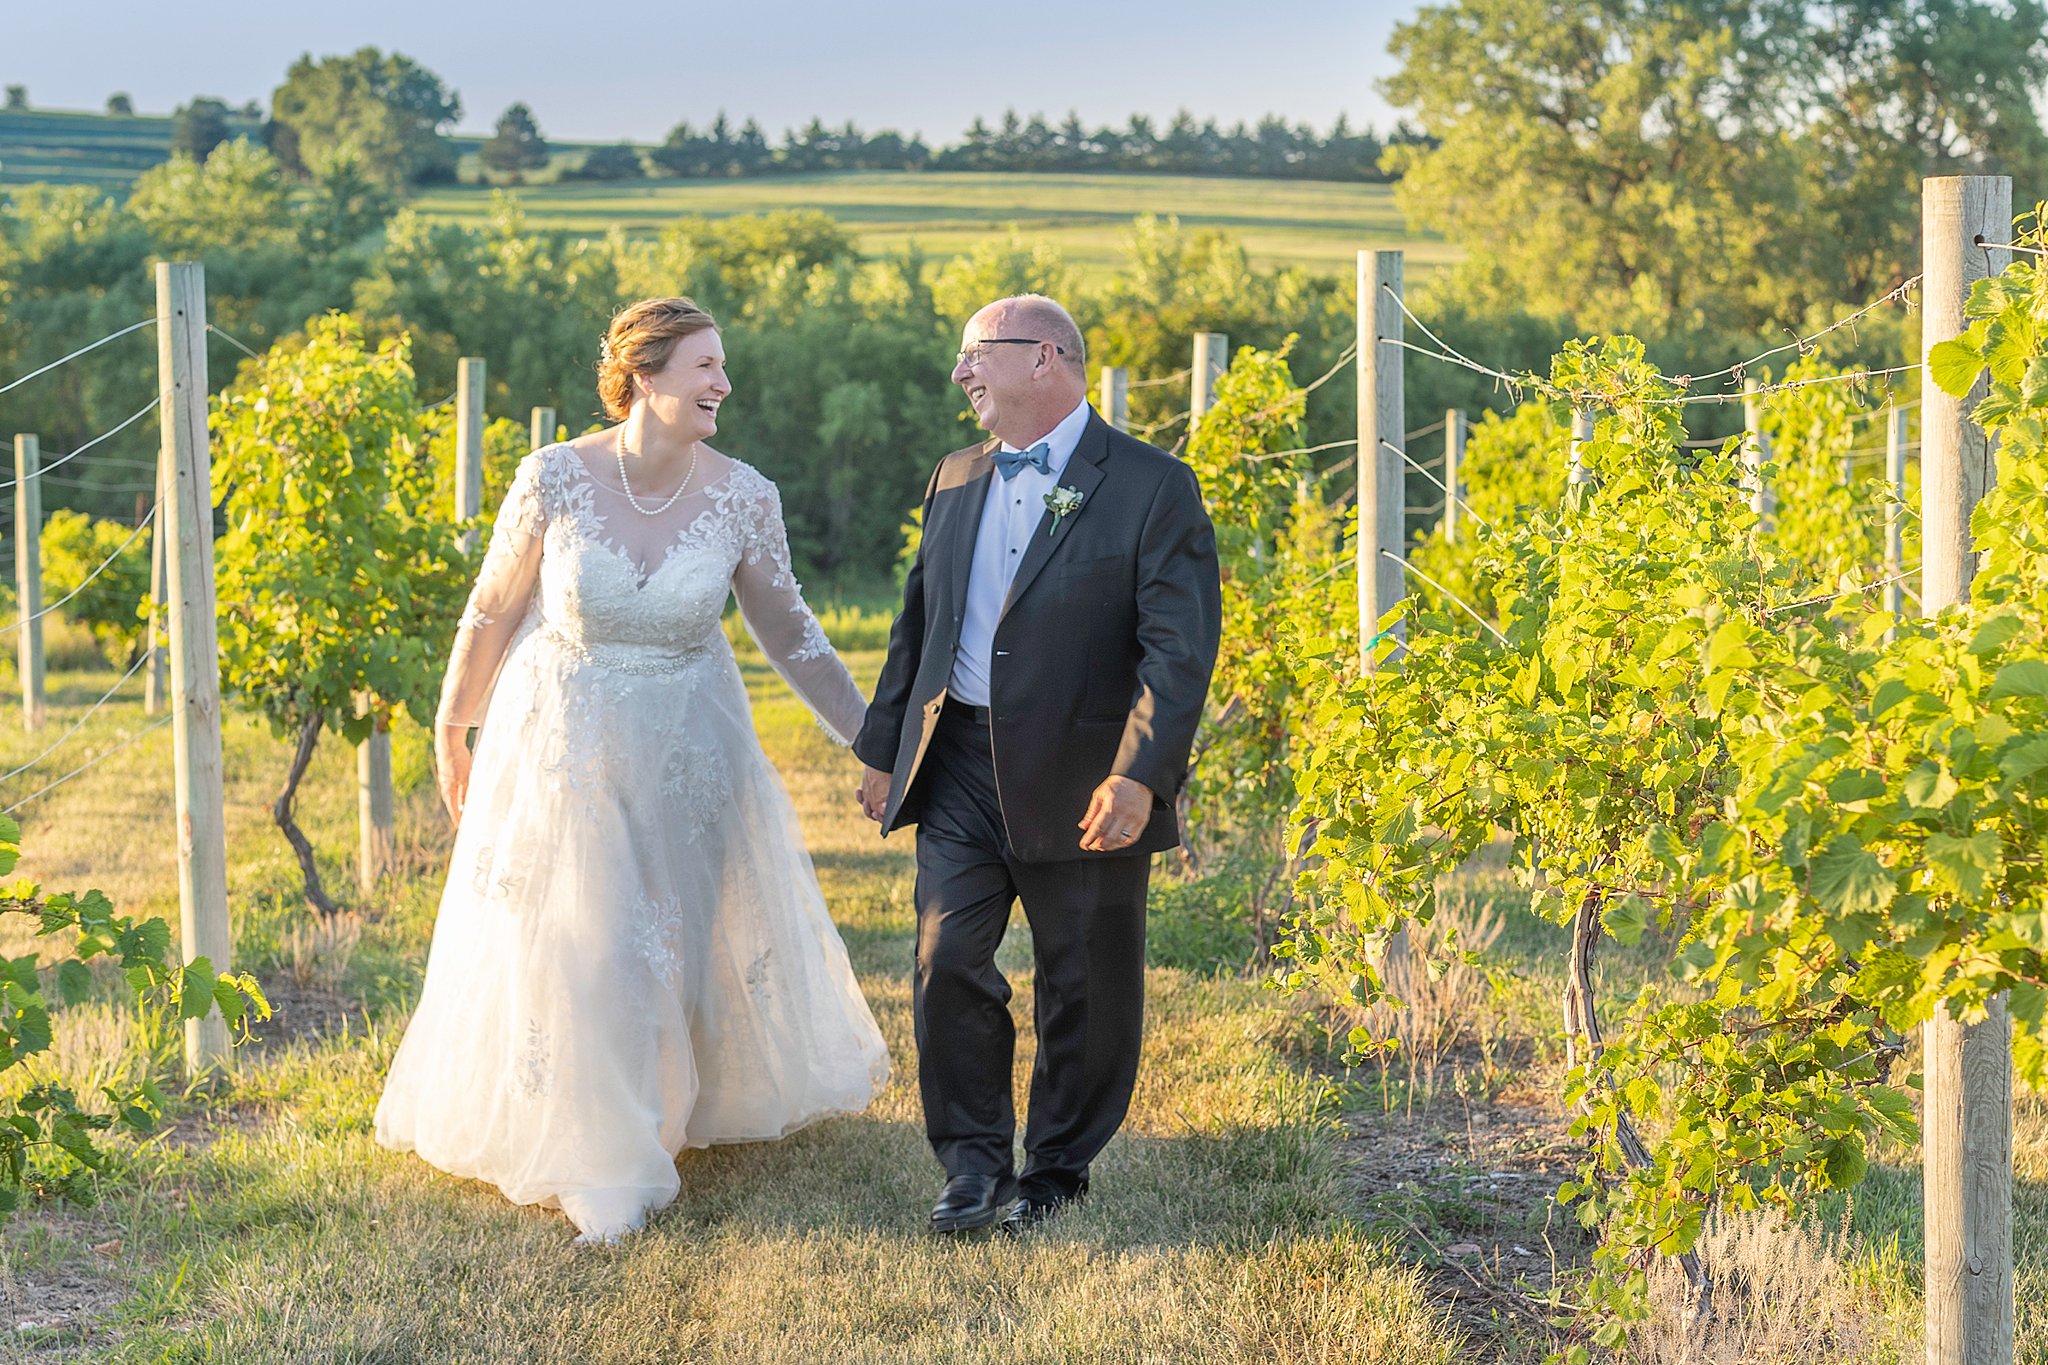 Newlyweds walk down a row of a vineyard holding hands with rolling hills behind them